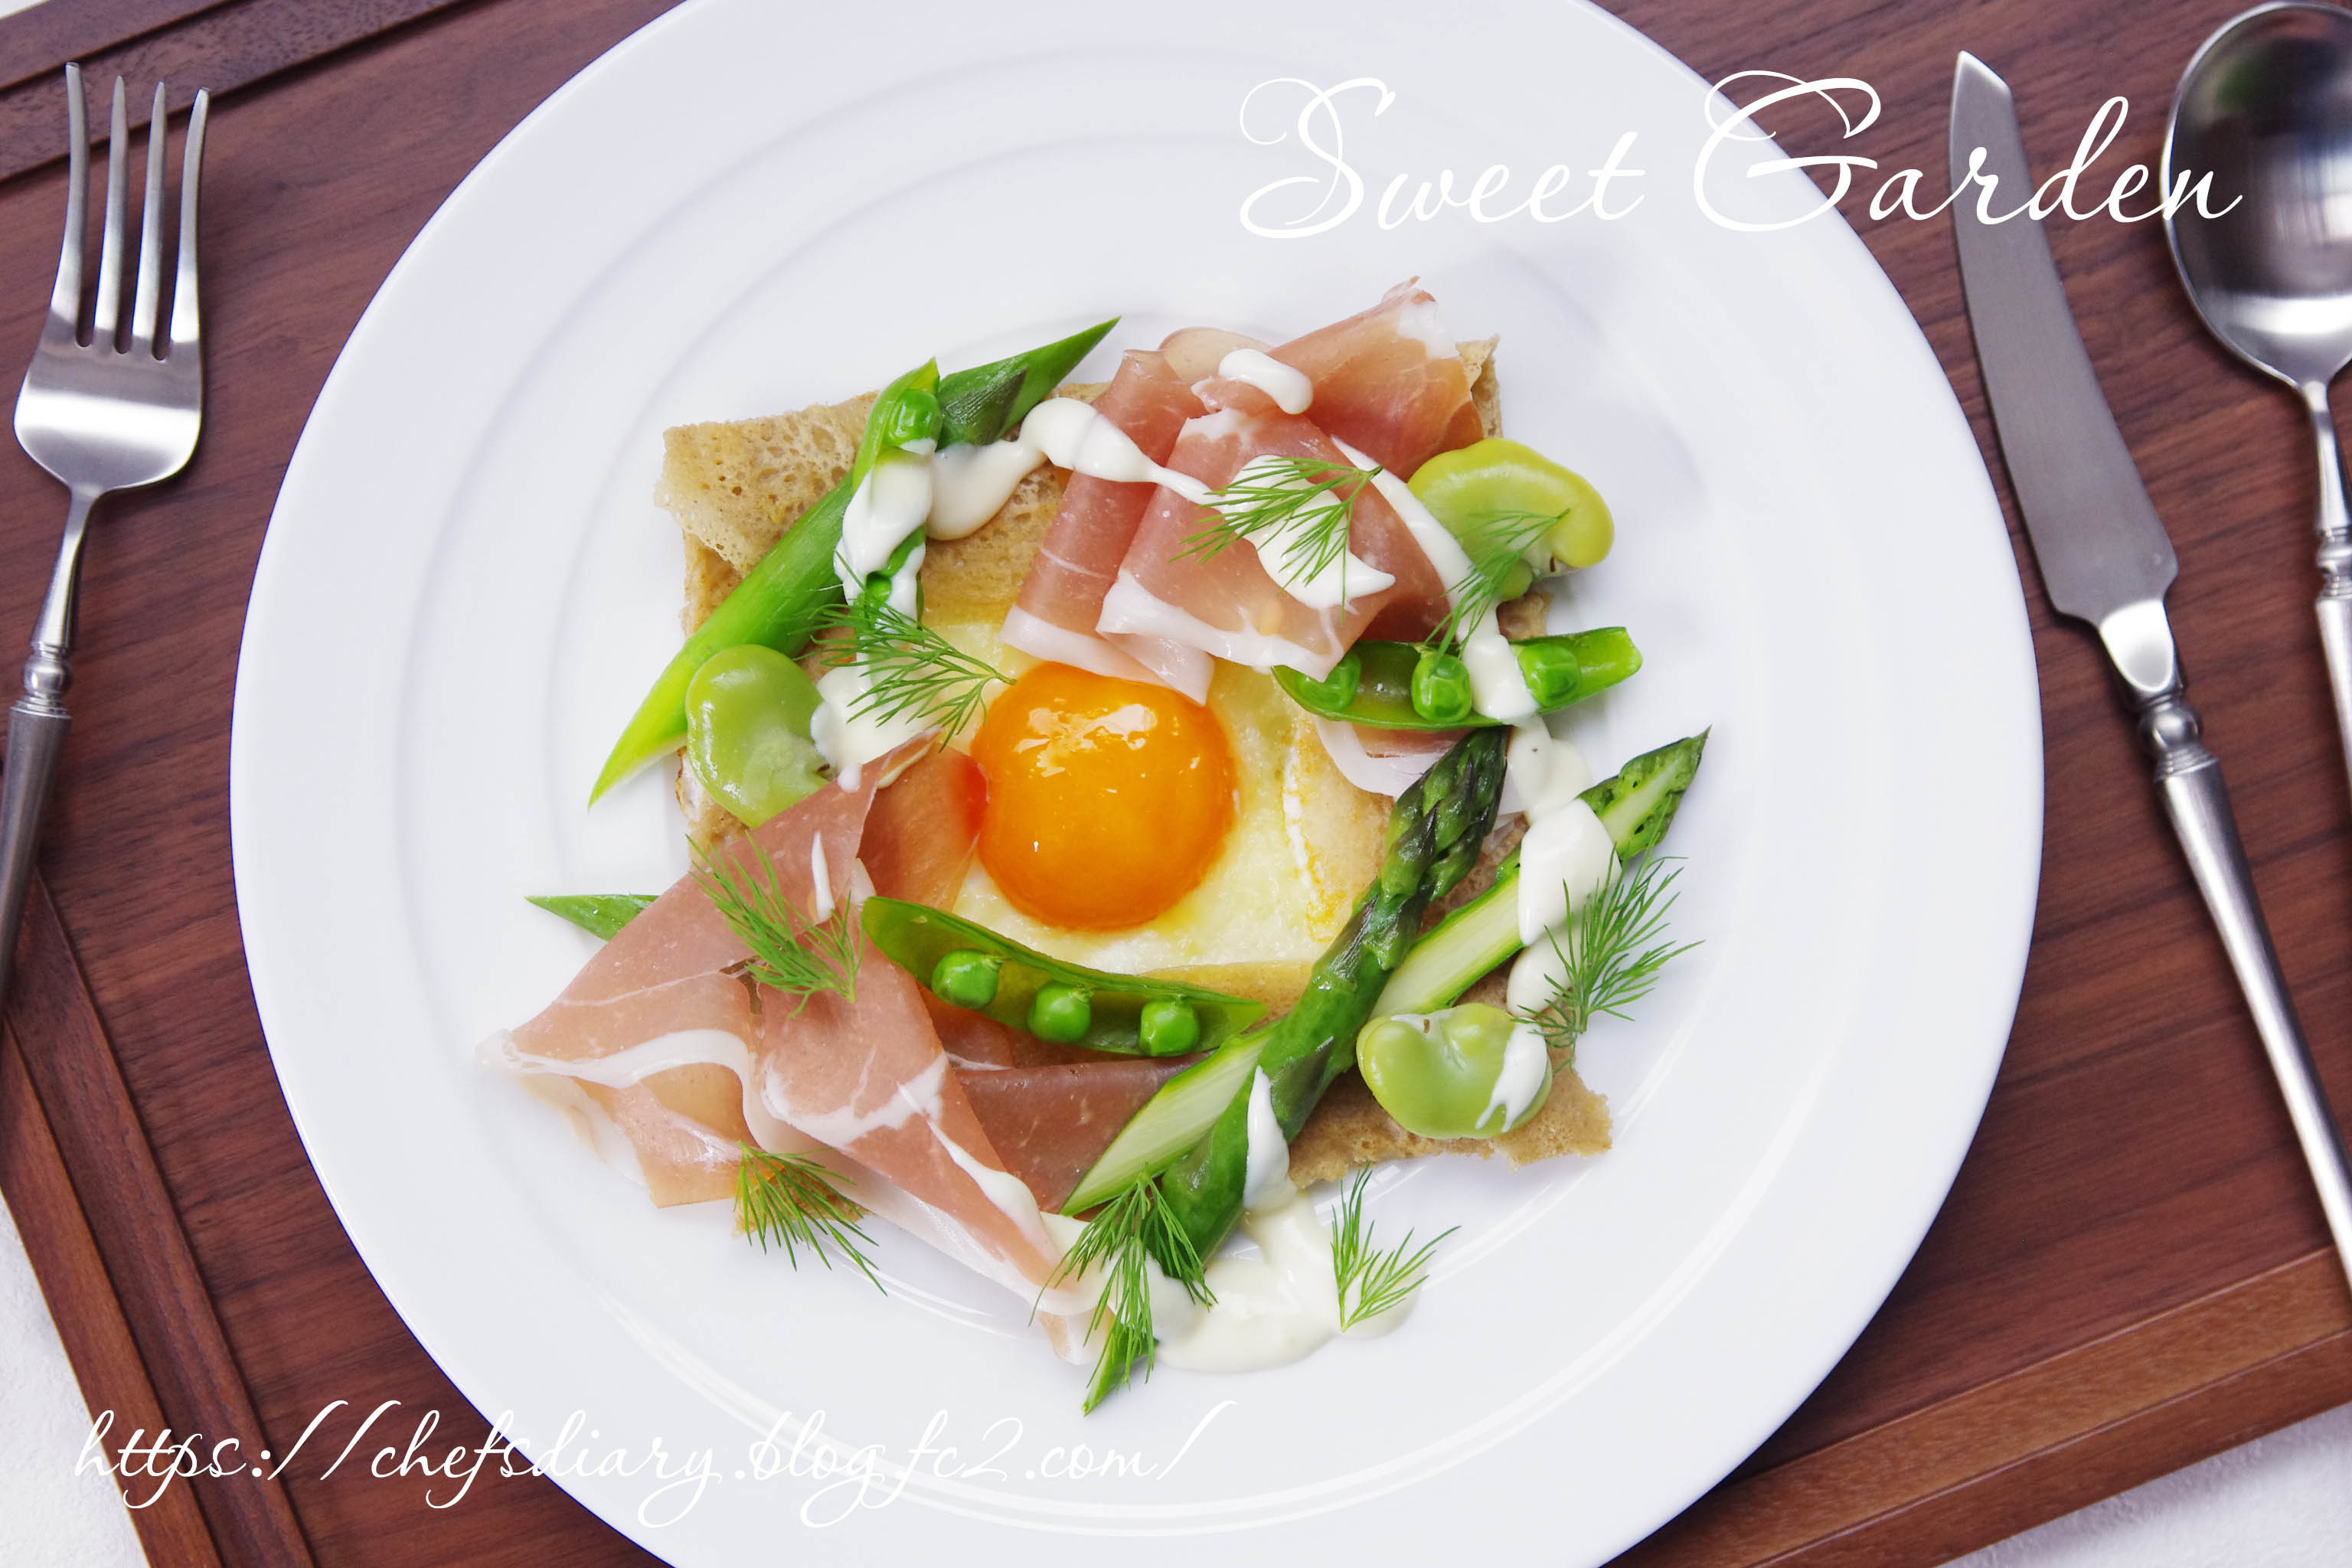 Buckwheat Galette with Spring Veggie and Prosciutto 　春野菜とプロシュートのガレット、レモンクリームソース